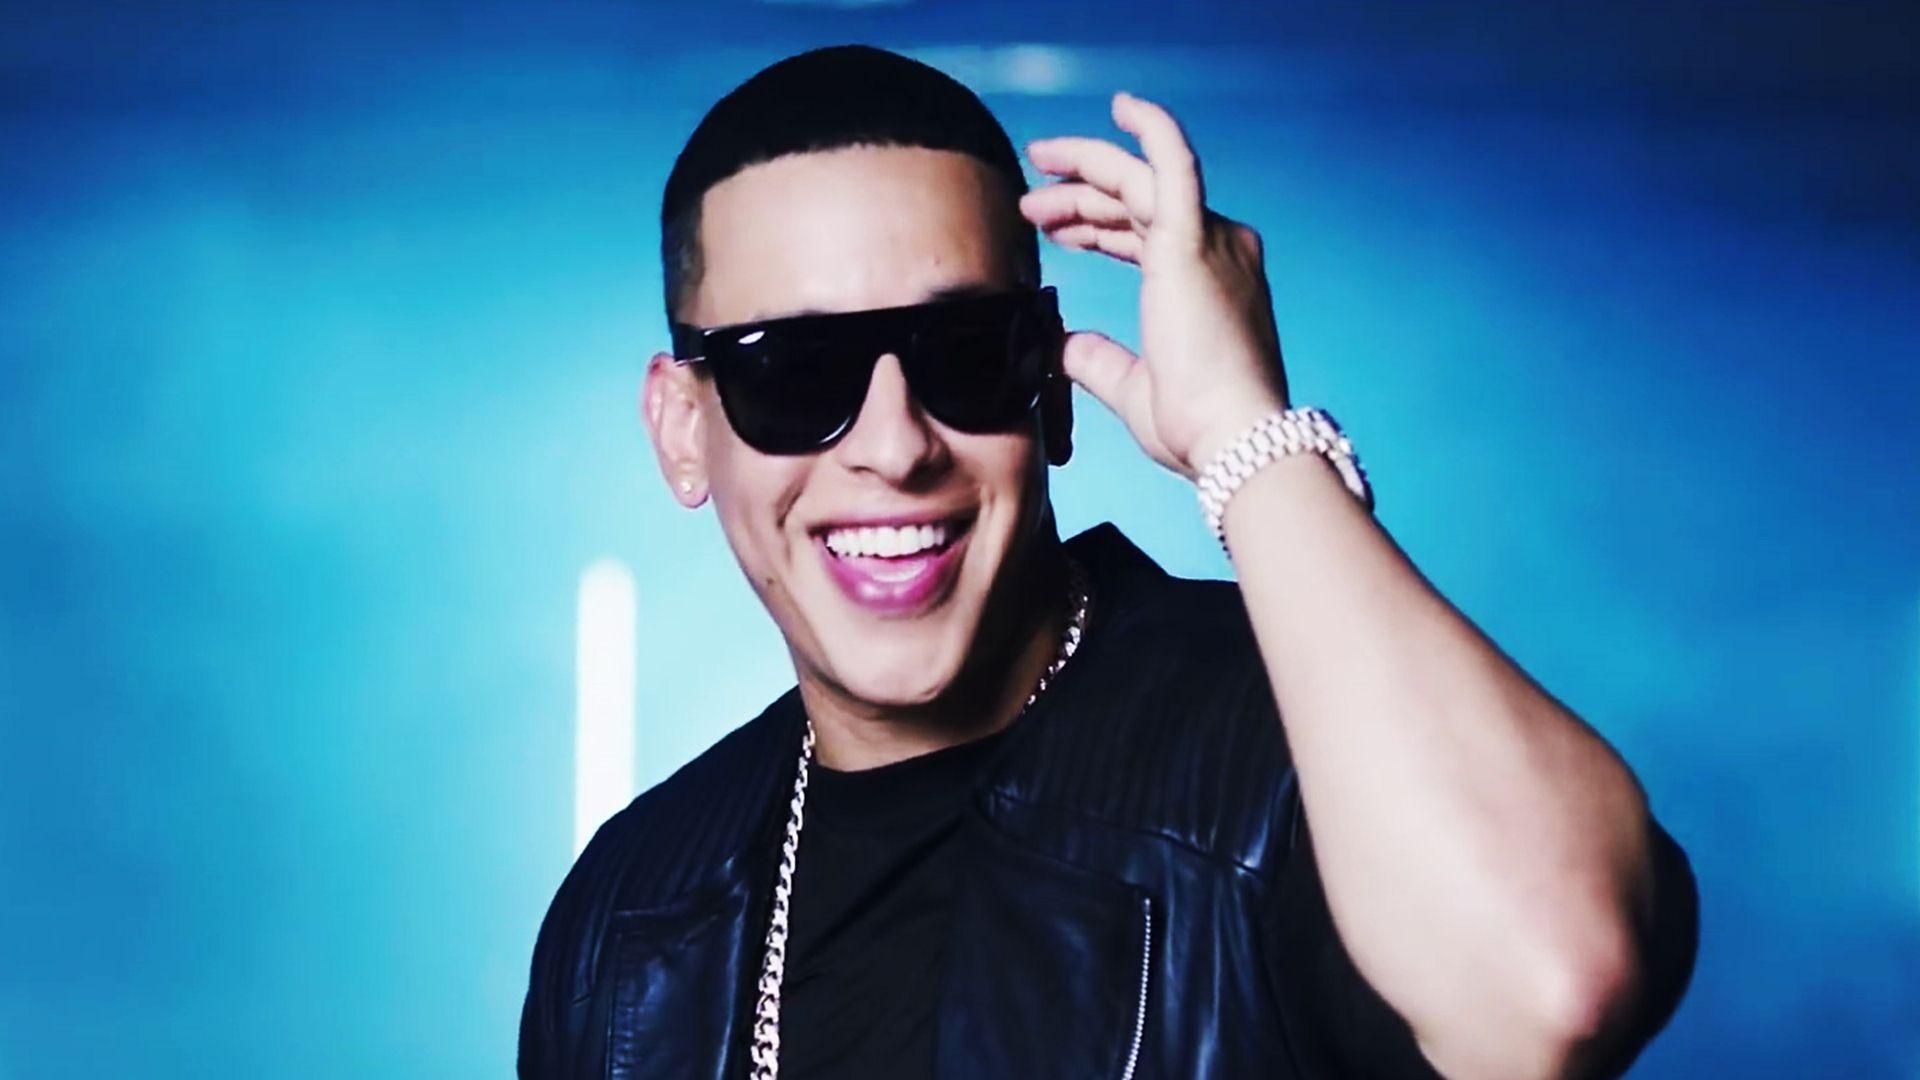 Daddy Yankee 2016 Wallpapers 05886.